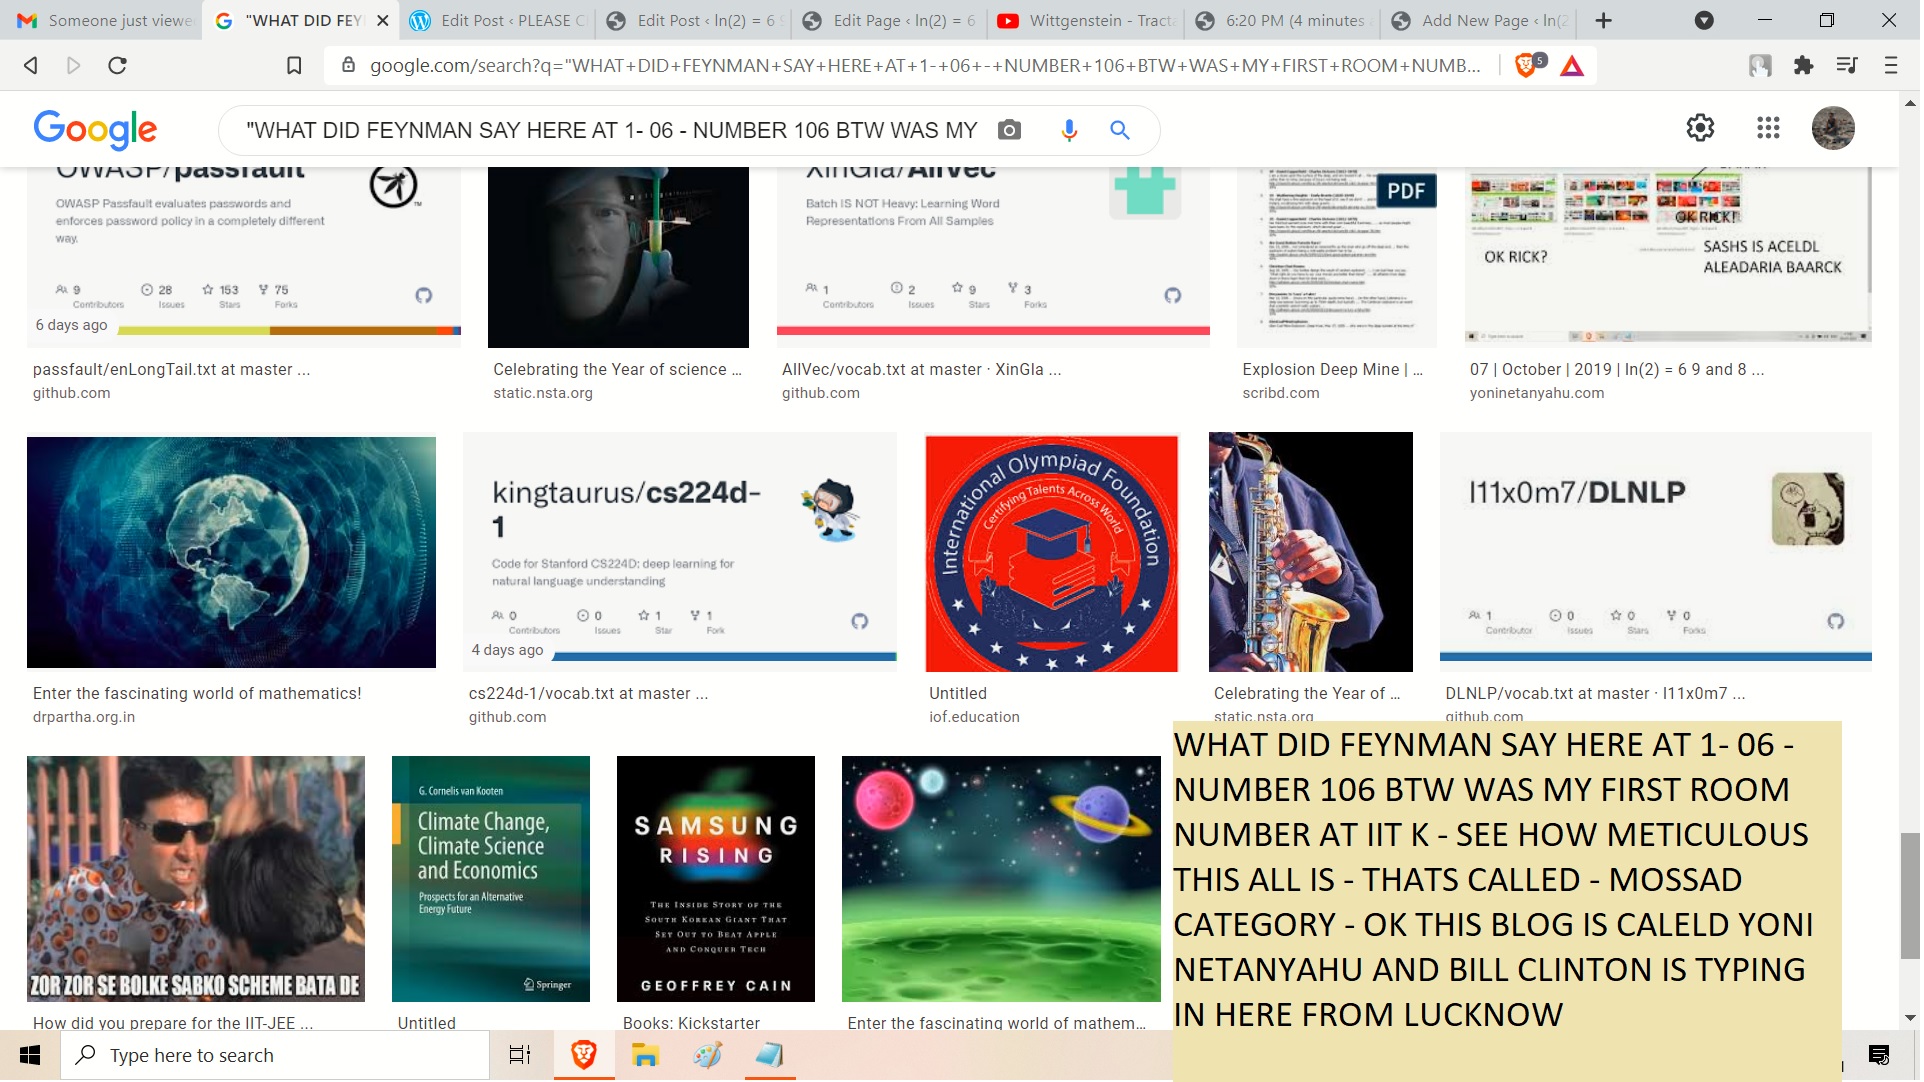 "WHAT DID FEYNMAN SAY HERE AT 1- 06 - NUMBER 106 BTW WAS MY FIRST ROOM NUMBER AT IIT K - SEE HOW METICULOUS THIS ALL IS - THATS CALLED - MOSSAD CATEGORY - OK THIS BLOG IS CALELD YONI NETANYAHU AND BILL CLINTON IS TYPING IN HERE FROM LUCKNOW "